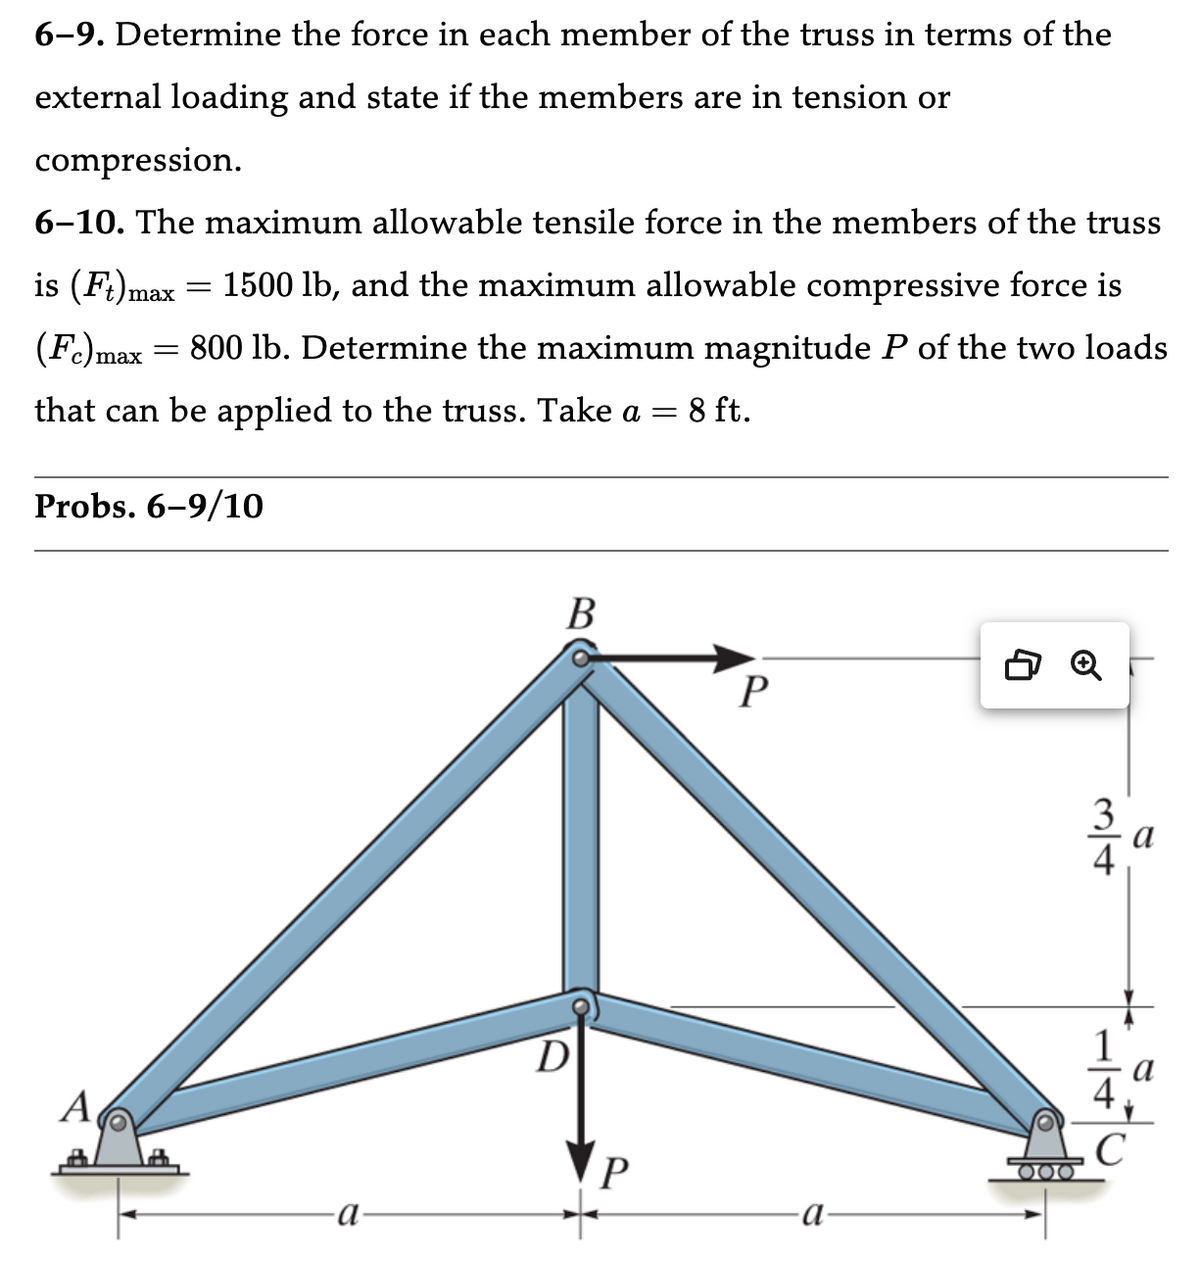 6-9. Determine the force in each member of the truss in terms of the
external loading and state if the members are in tension or
compression.
6-10. The maximum allowable tensile force in the members of the truss
is (Ft)max = 1500 lb, and the maximum allowable compressive force is
(Fc) max = 800 lb. Determine the maximum magnitude P of the two loads
that can be applied to the truss. Take a 8 ft.
=
Probs. 6-9/10
A
-a
B
D
P
P
·a
ΙΙΟΙ
ml+
3
C